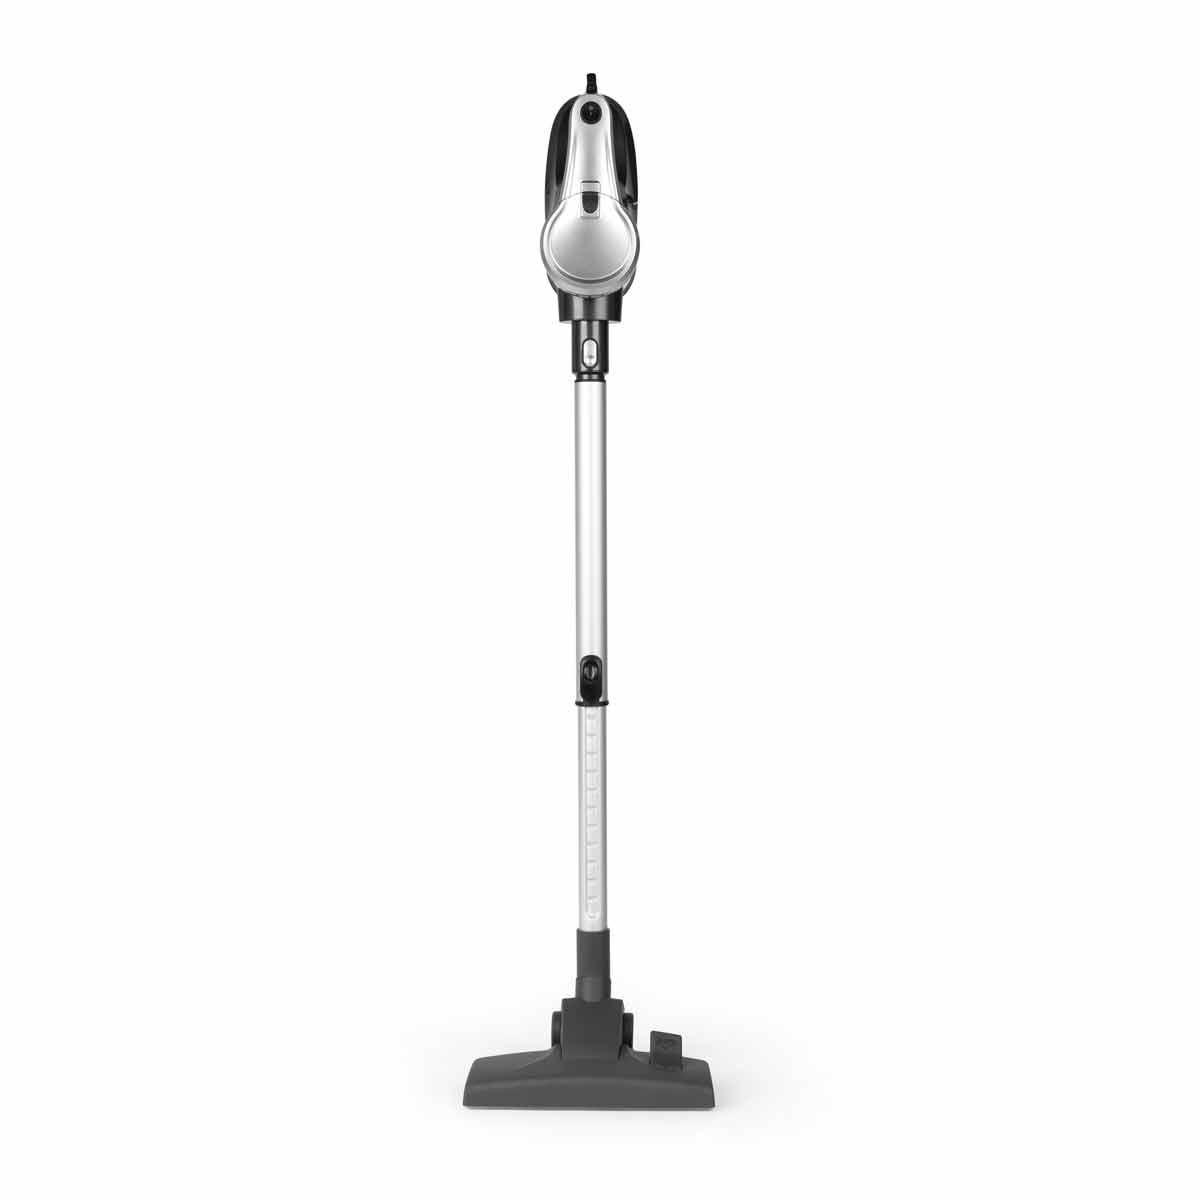 Beldray BEL0769SL 2-in-1 Quick Vac Lite Multi-surface Bagless Cyclonic Stick Vacuum Cleaner - Silver